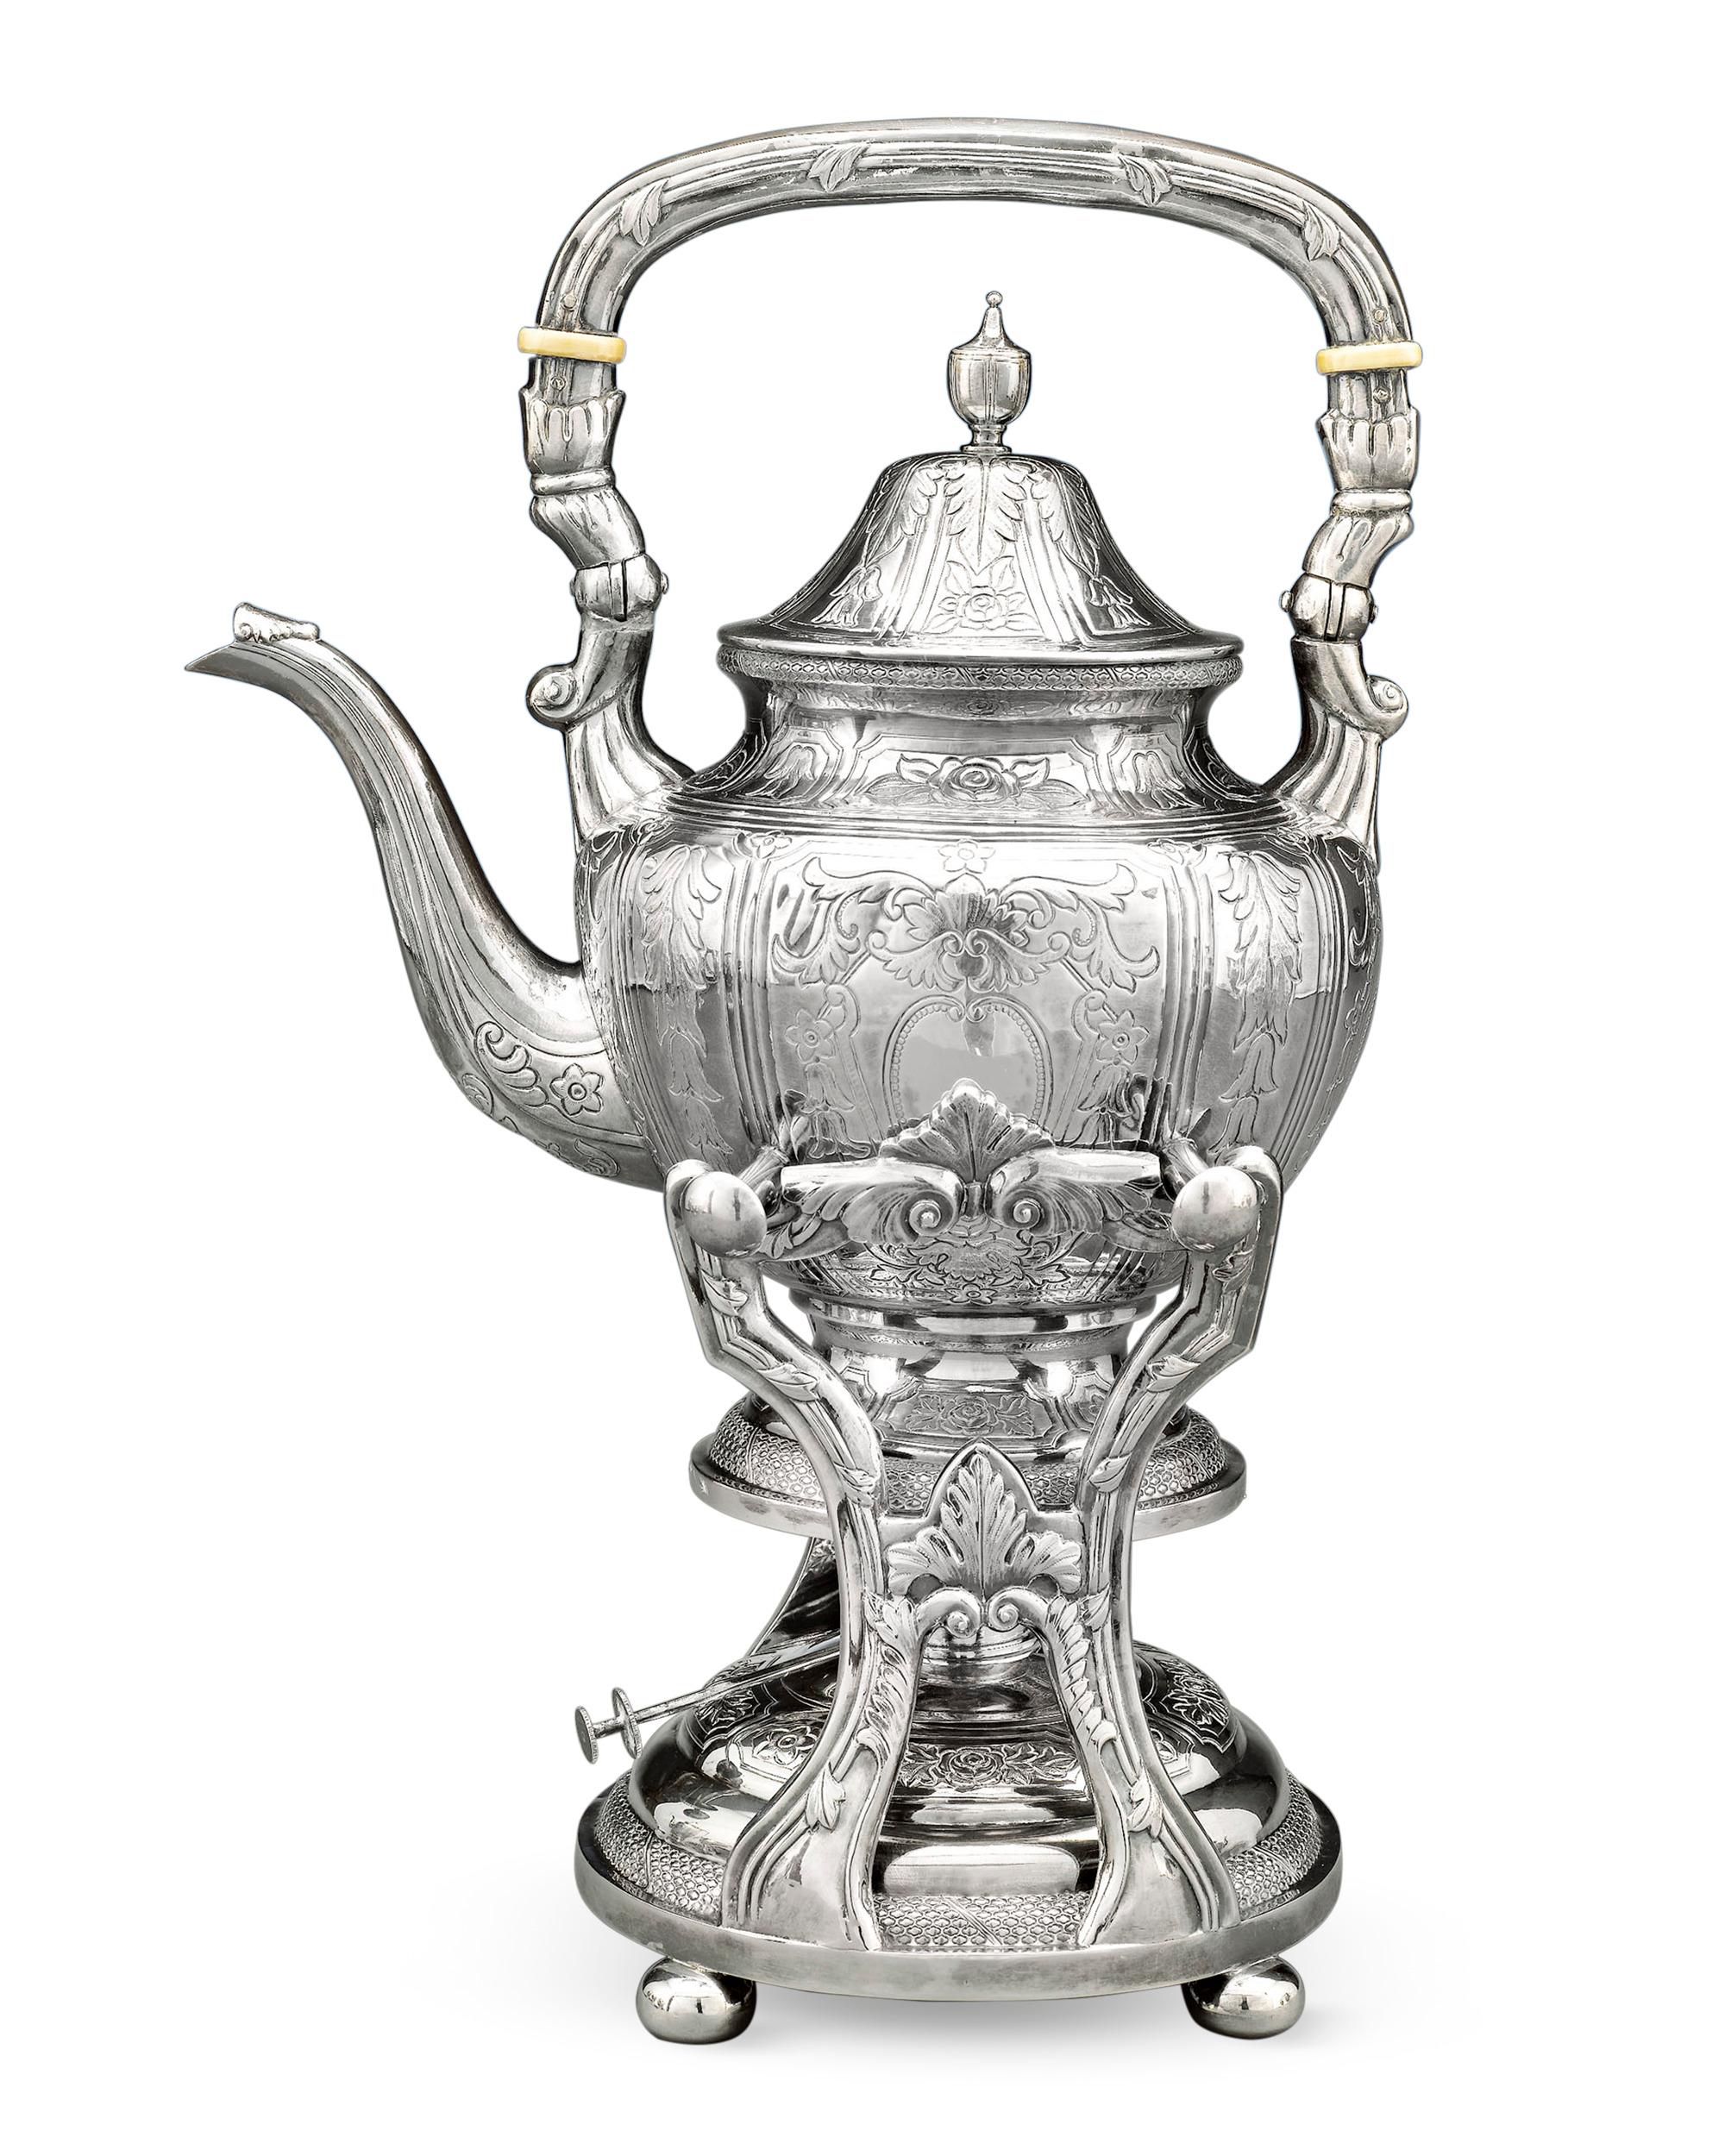 This stunning and complete seven-piece Chinese export silver tea and coffee service was crafted by Yu Chang of Shanghai and Hong Kong, a firm renowned for its unique and high-quality creations. Comprising a hot water kettle and stand, tea pot,